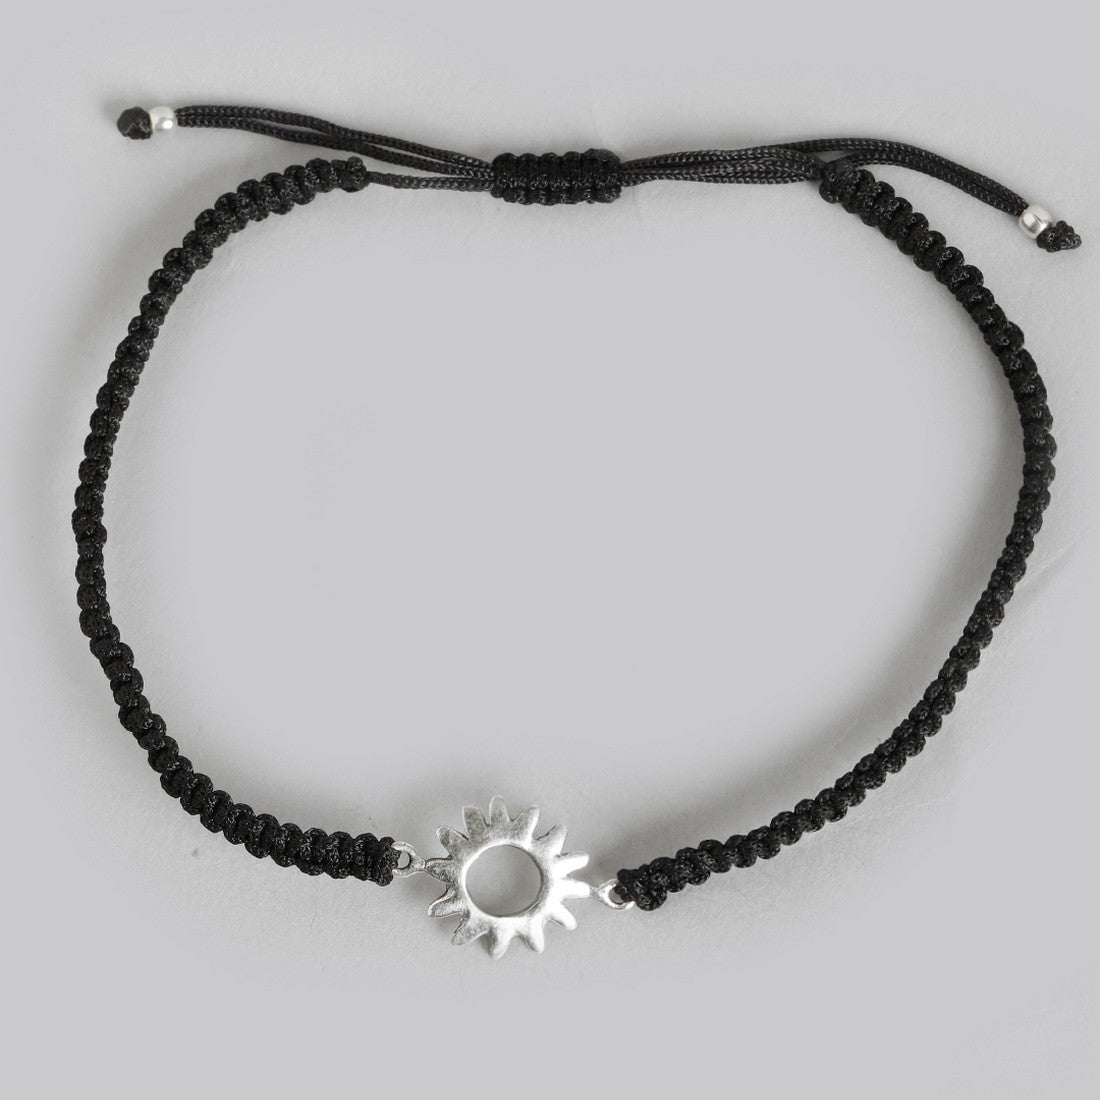 Classic 925 Sterling Silver Black Tread Anklet